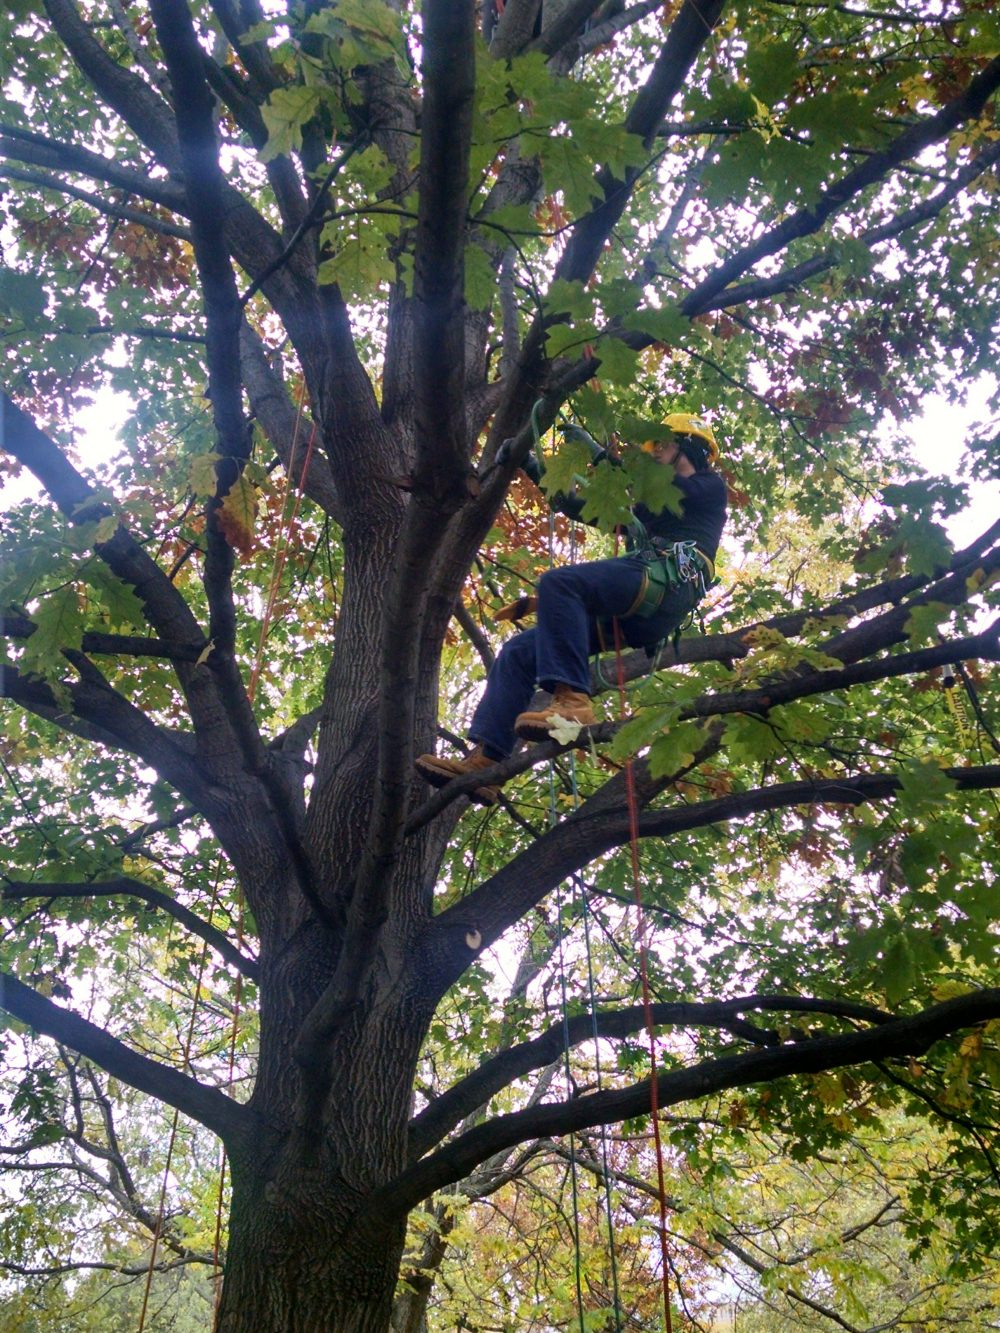 A student in a tree